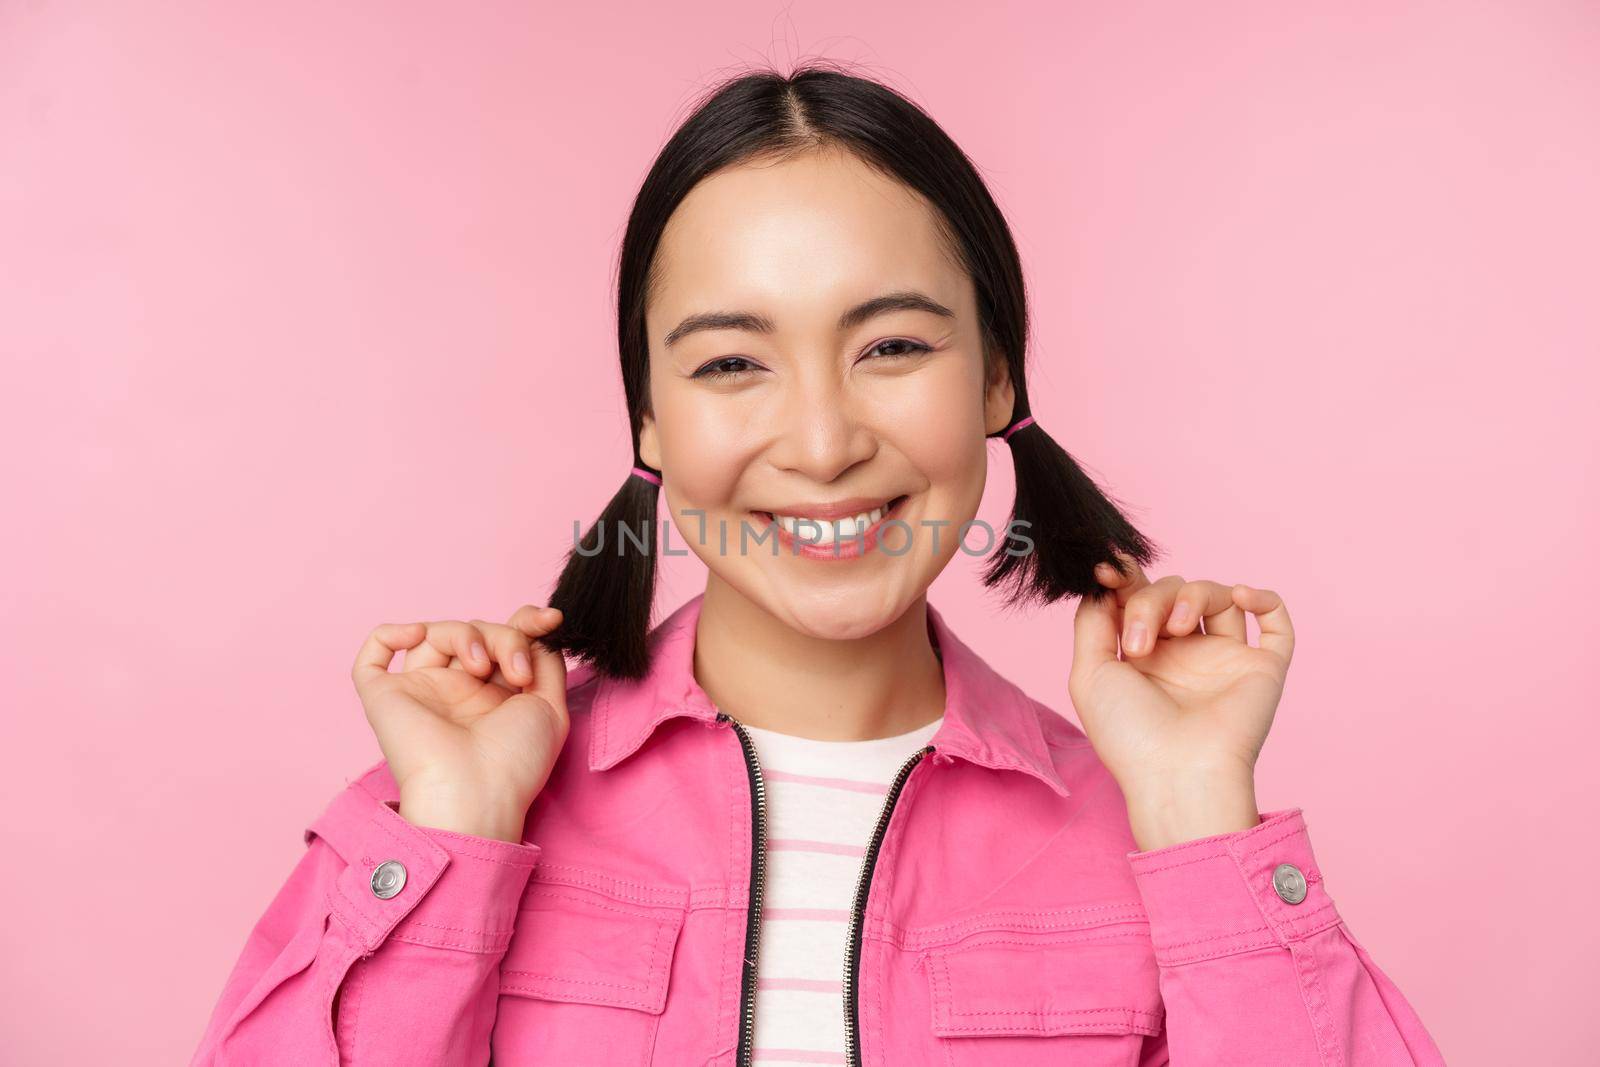 Skin care and cosmetology concept. Beautiful asian girl smiling and laughing, showing clean healthy facial skin, posing against pink background. Copy space